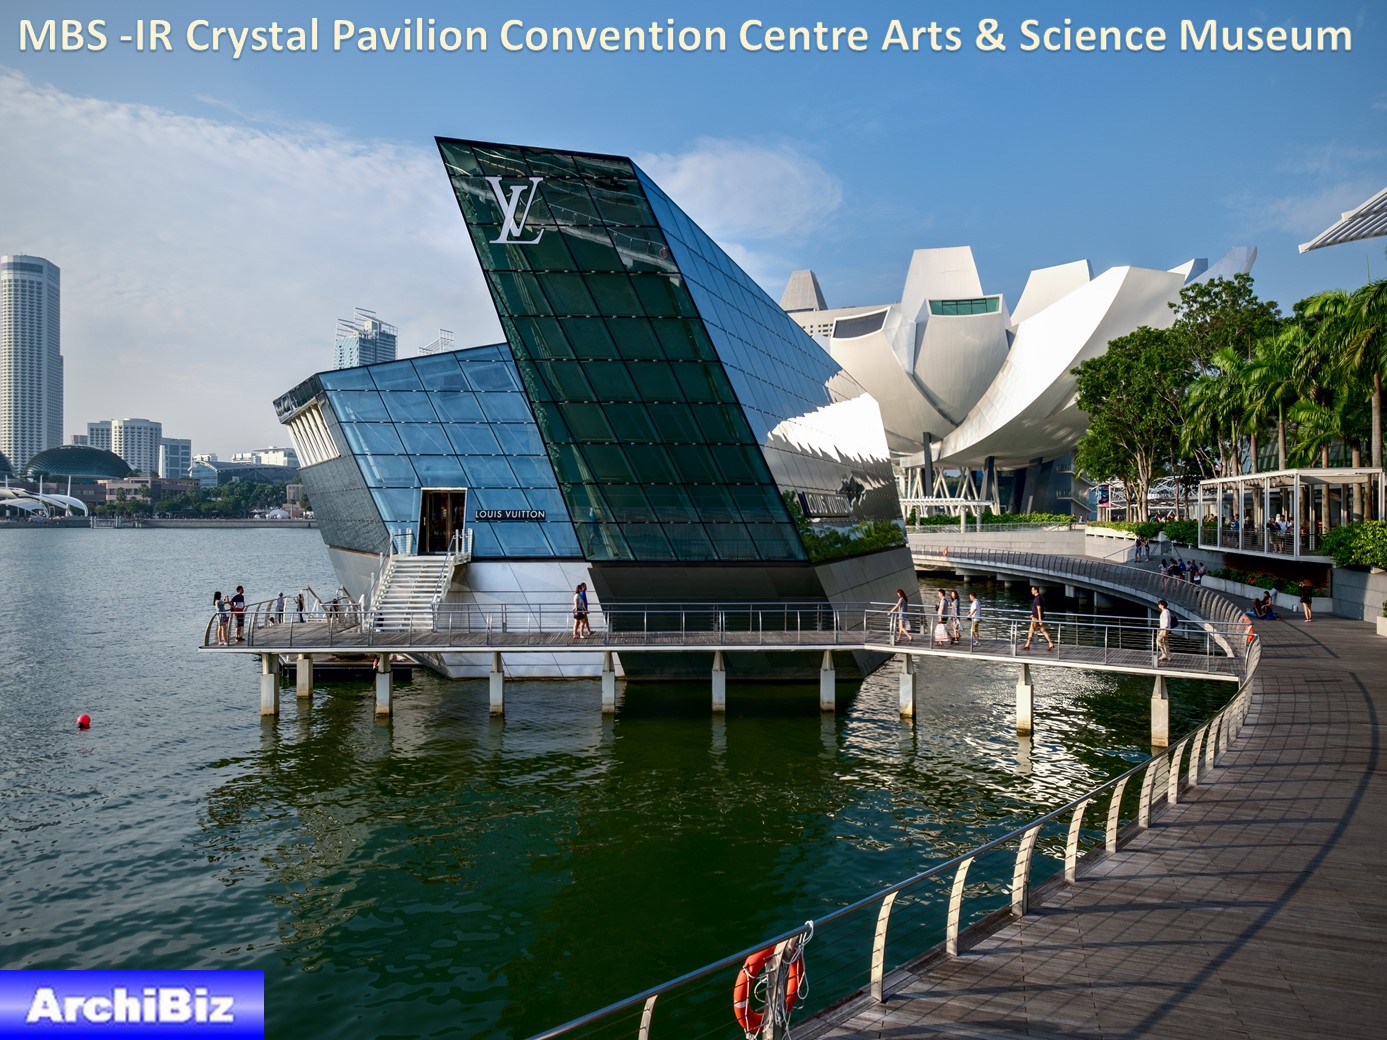 MBS -IR Crystal Pavilion Convention Centre Arts & Science Museum (13)